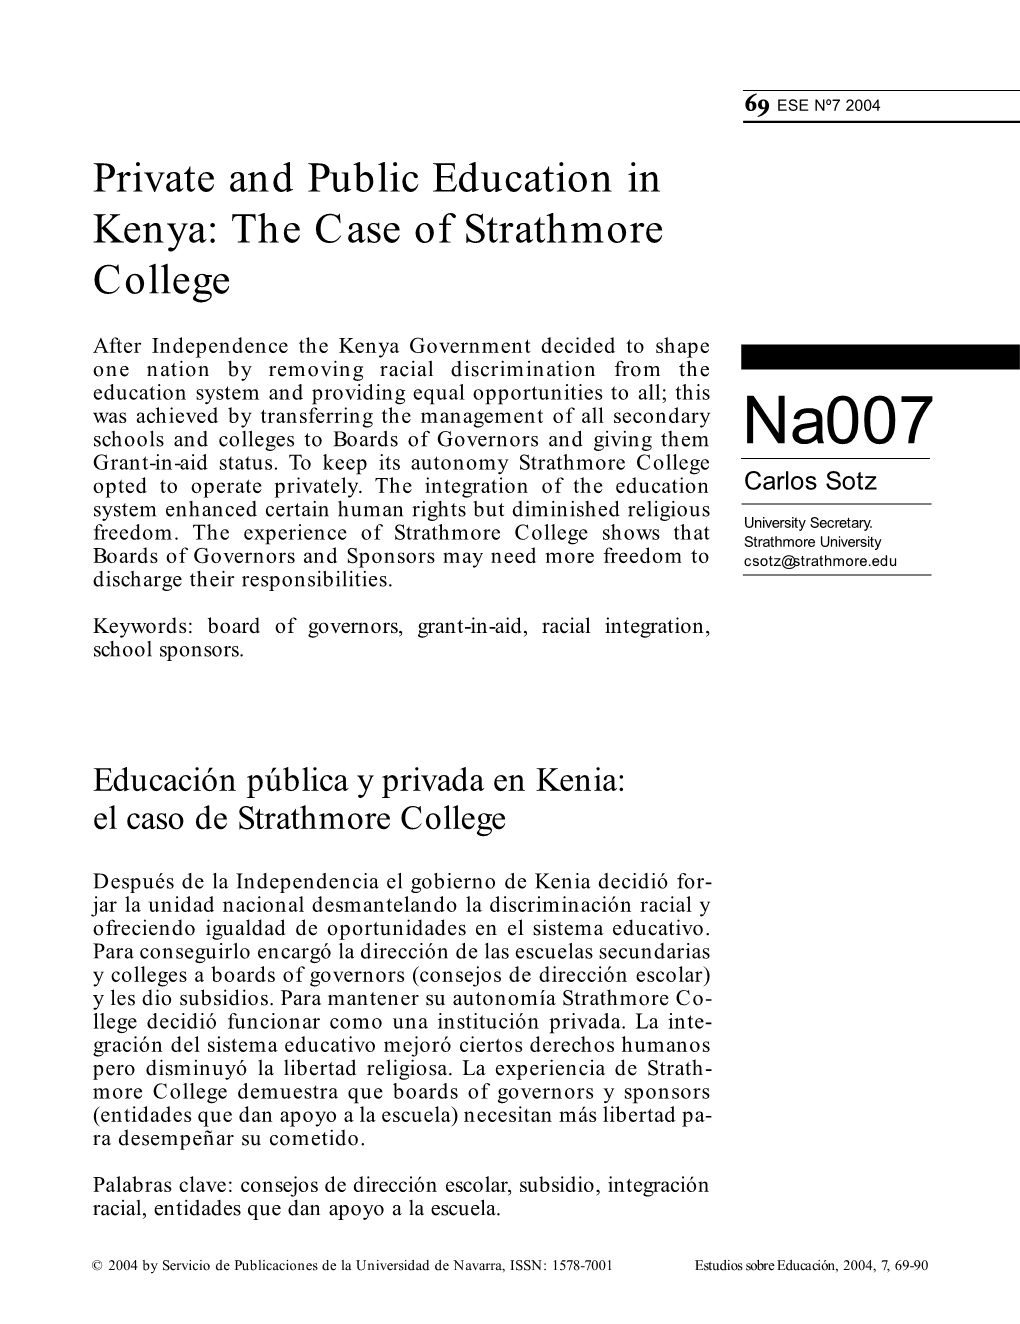 Private and Public Education in Kenya: the Case of Strathmore College